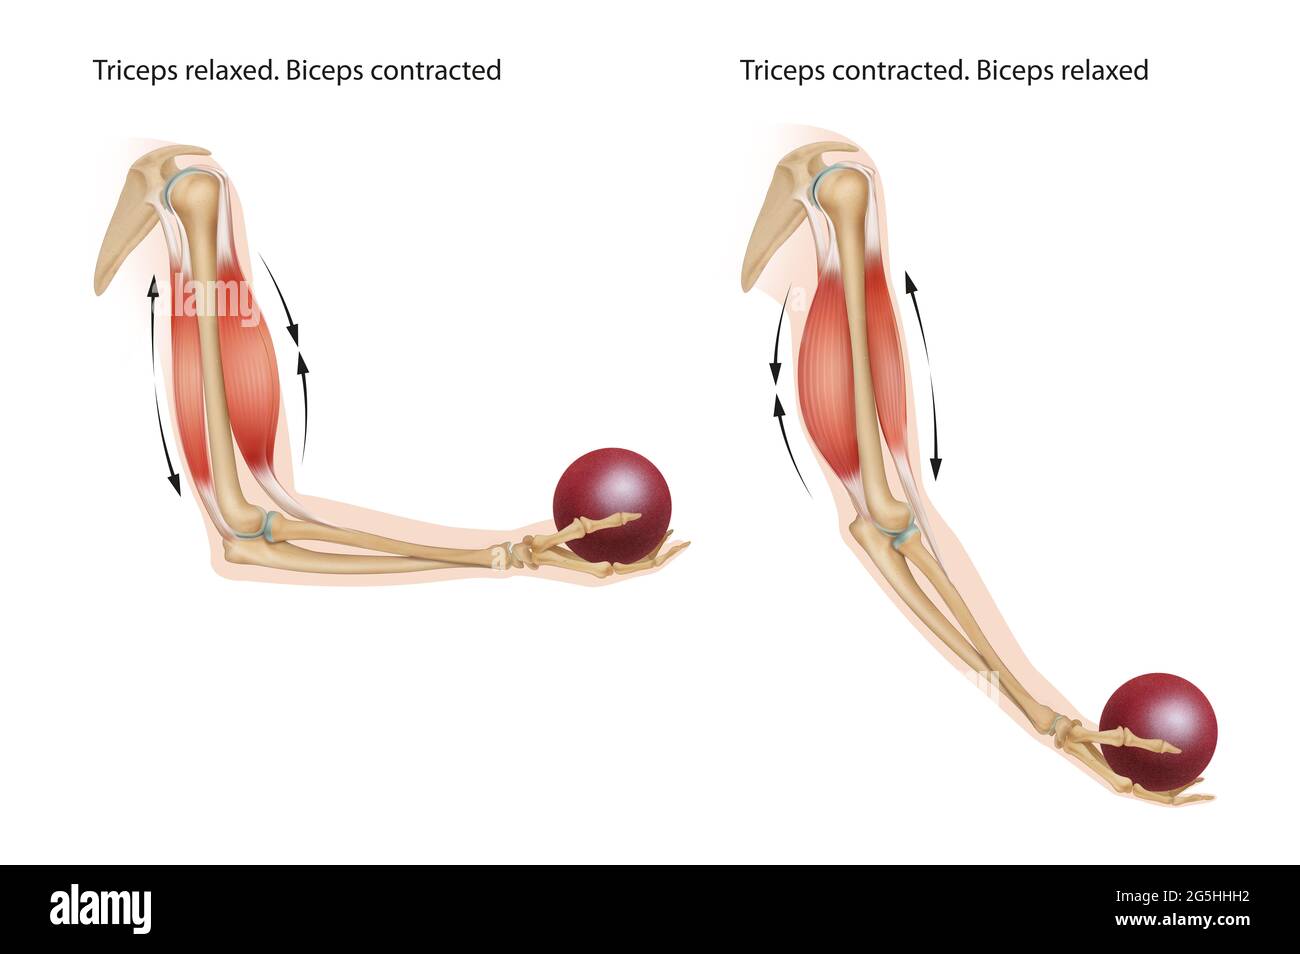 https://c8.alamy.com/comp/2G5HHH2/biceps-are-contracted-and-the-triceps-are-relaxed-the-biceps-is-relaxed-and-the-triceps-are-contracted-2G5HHH2.jpg